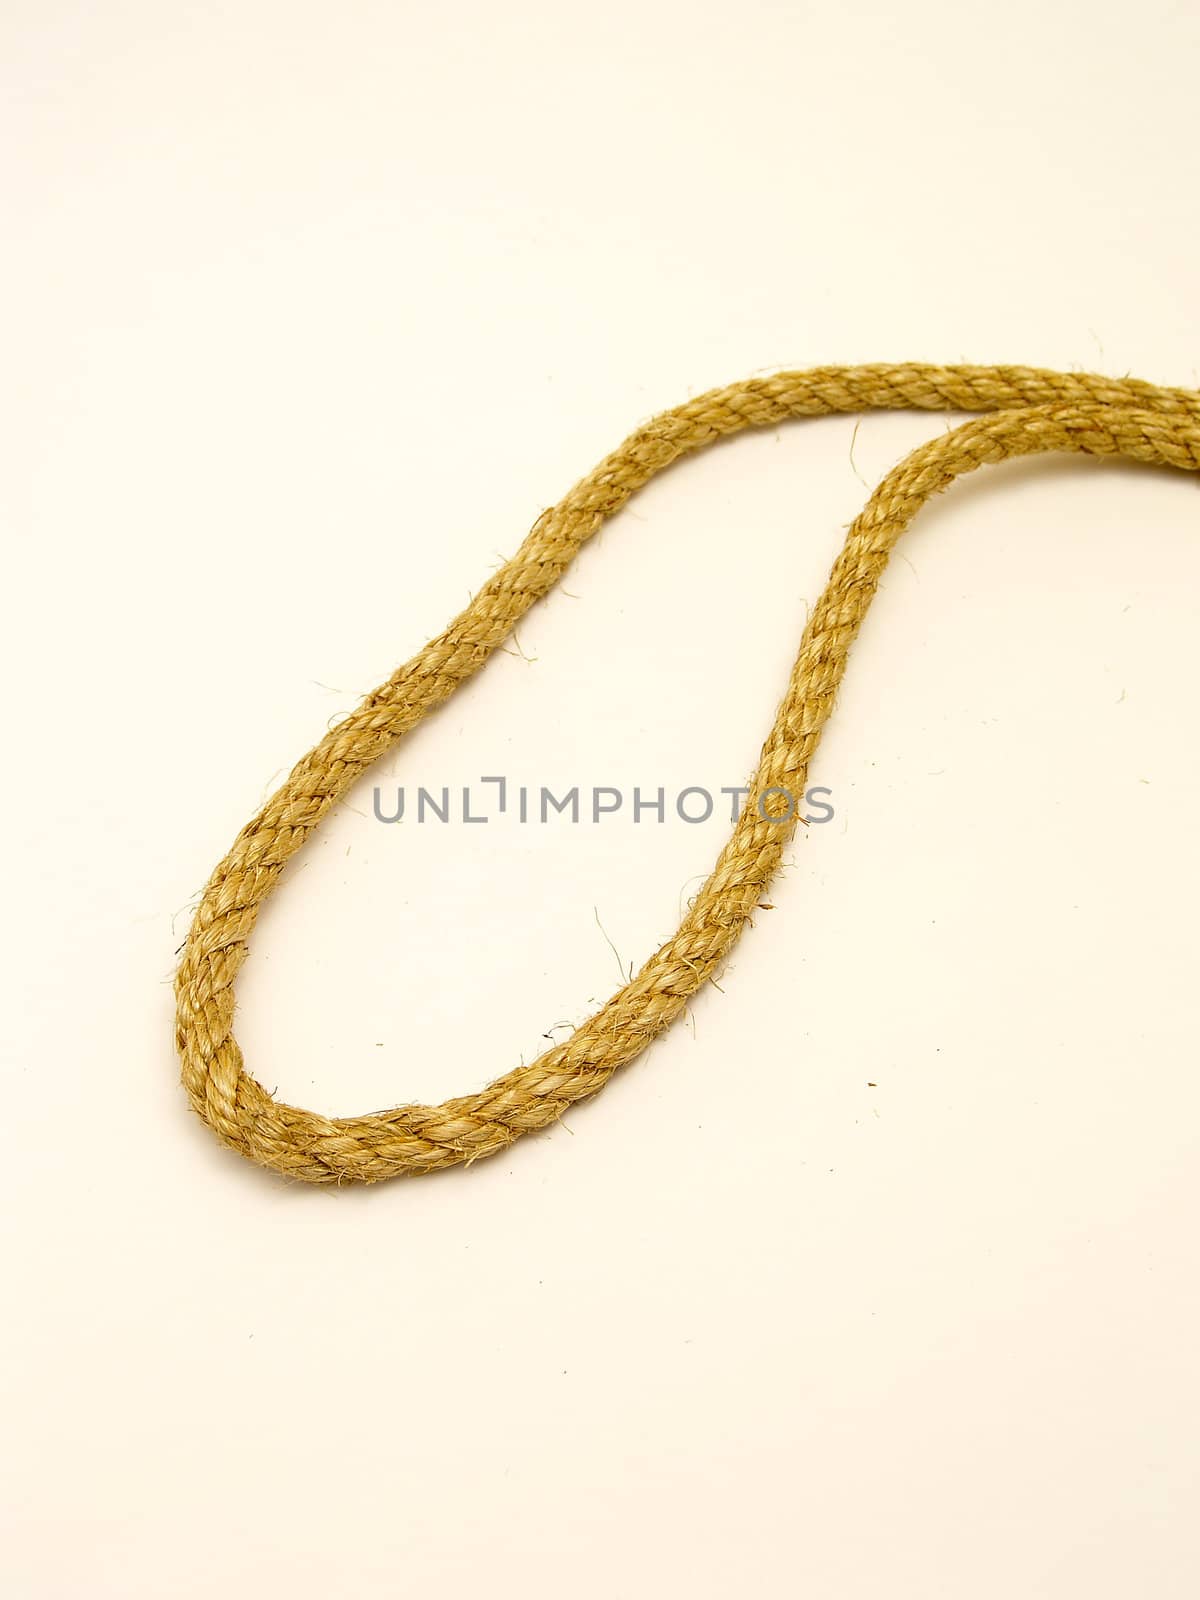 	
rope isolated on a white background